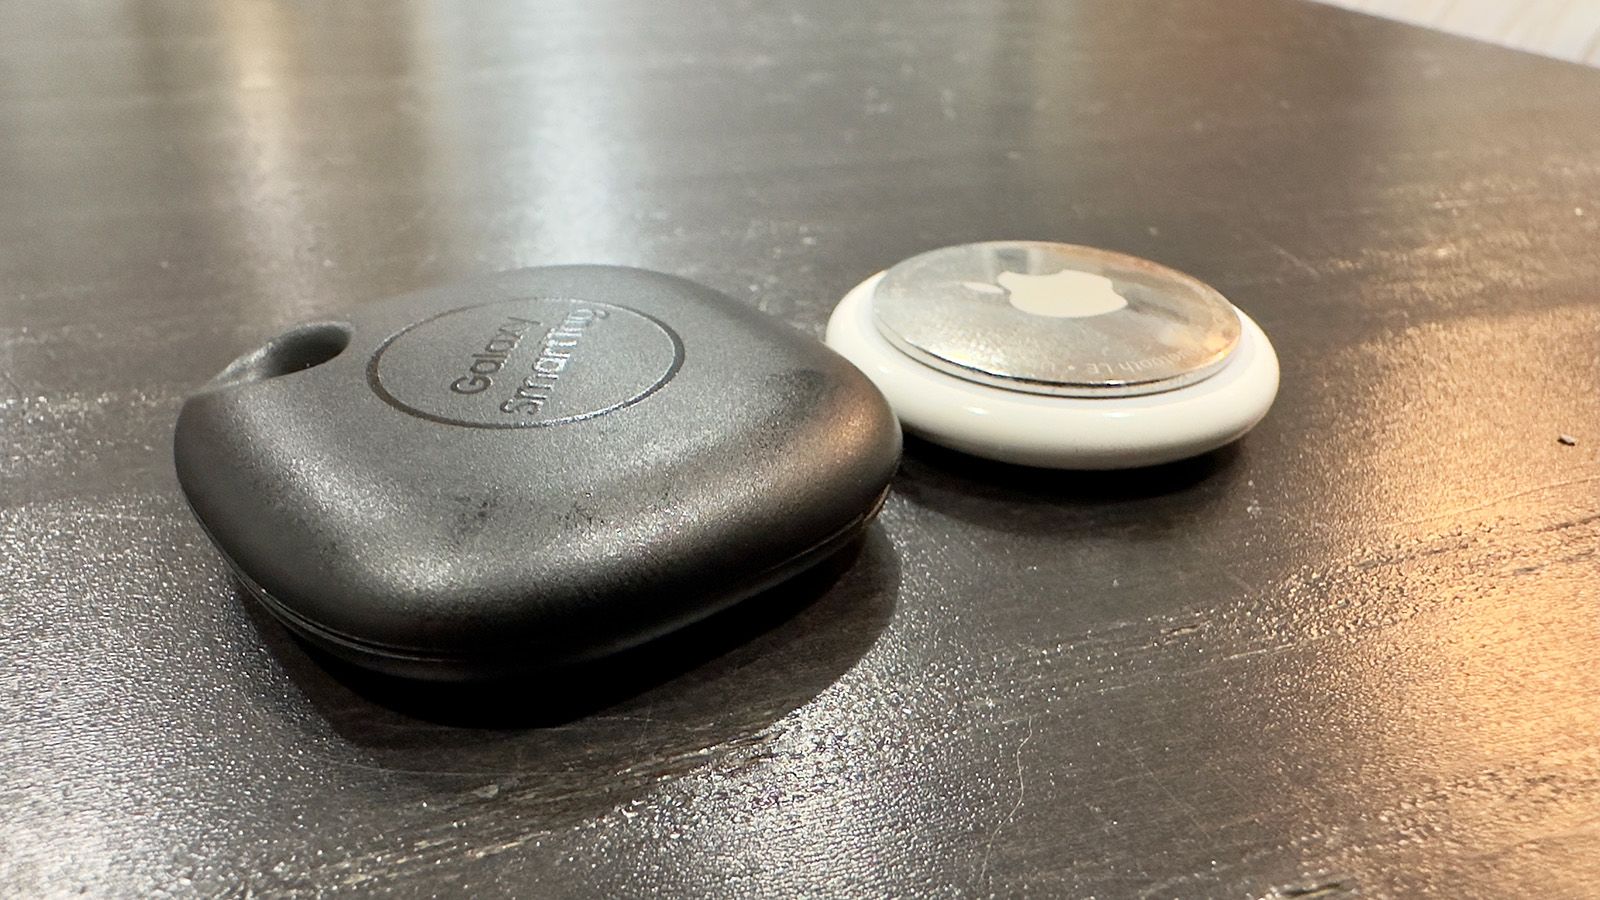 AirTag vs. Tile vs. Galaxy SmartTag: Specs, Prices and Features